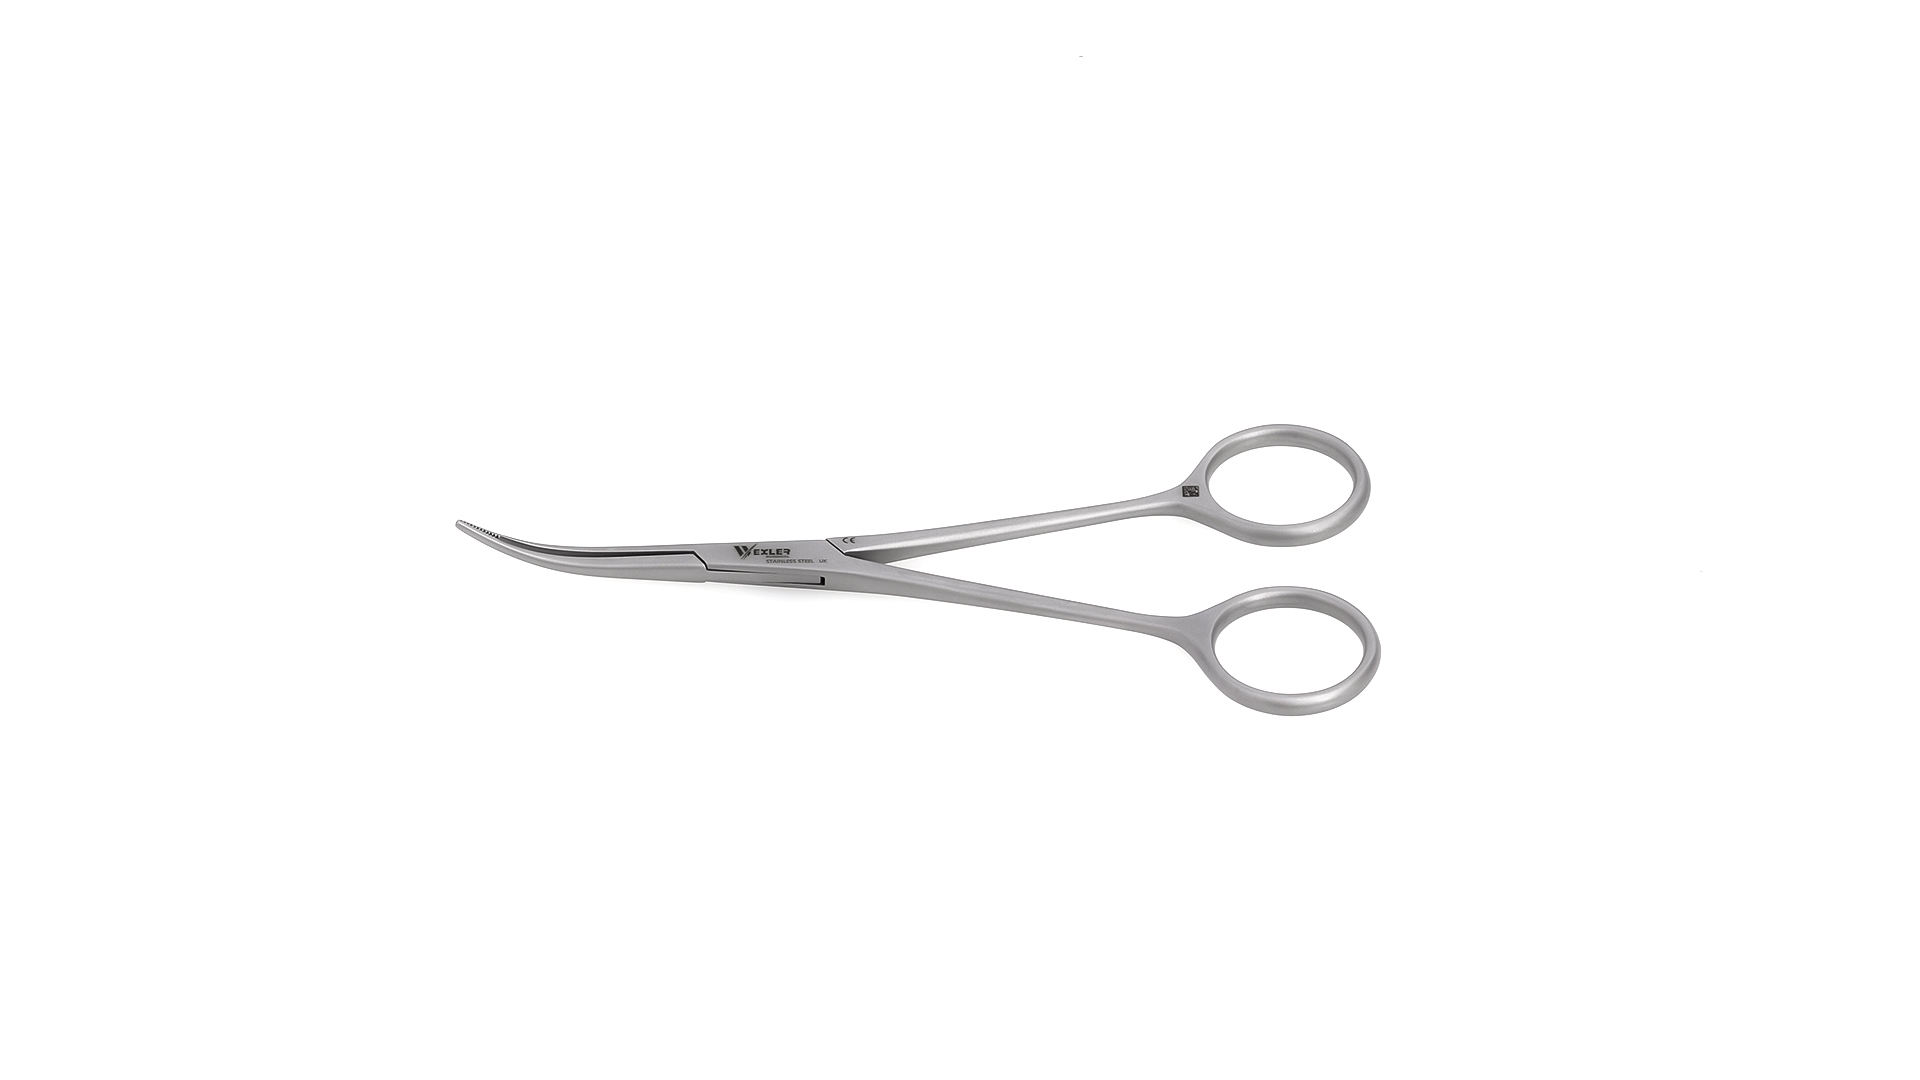 Waterson's Dissector - Curved Delicate serrated jaws with 1.5mm tips